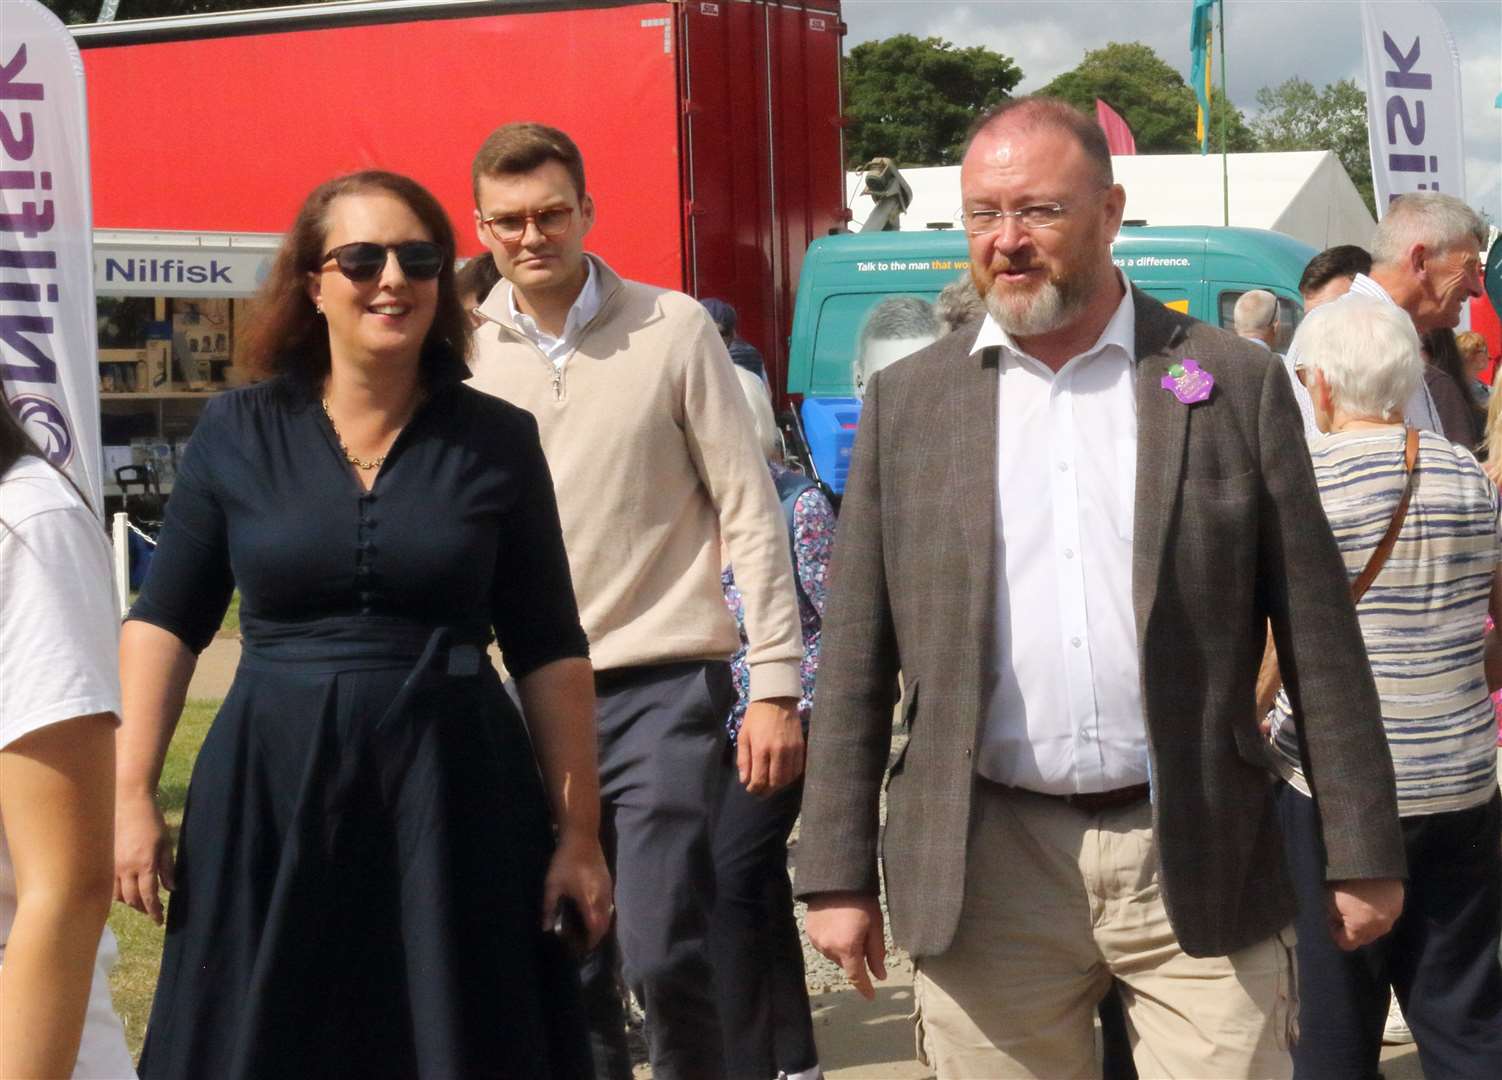 I was joined by UK Government Minister for Farming, Fisheries and Food, Victoria Prentis MP at Turriff Show.